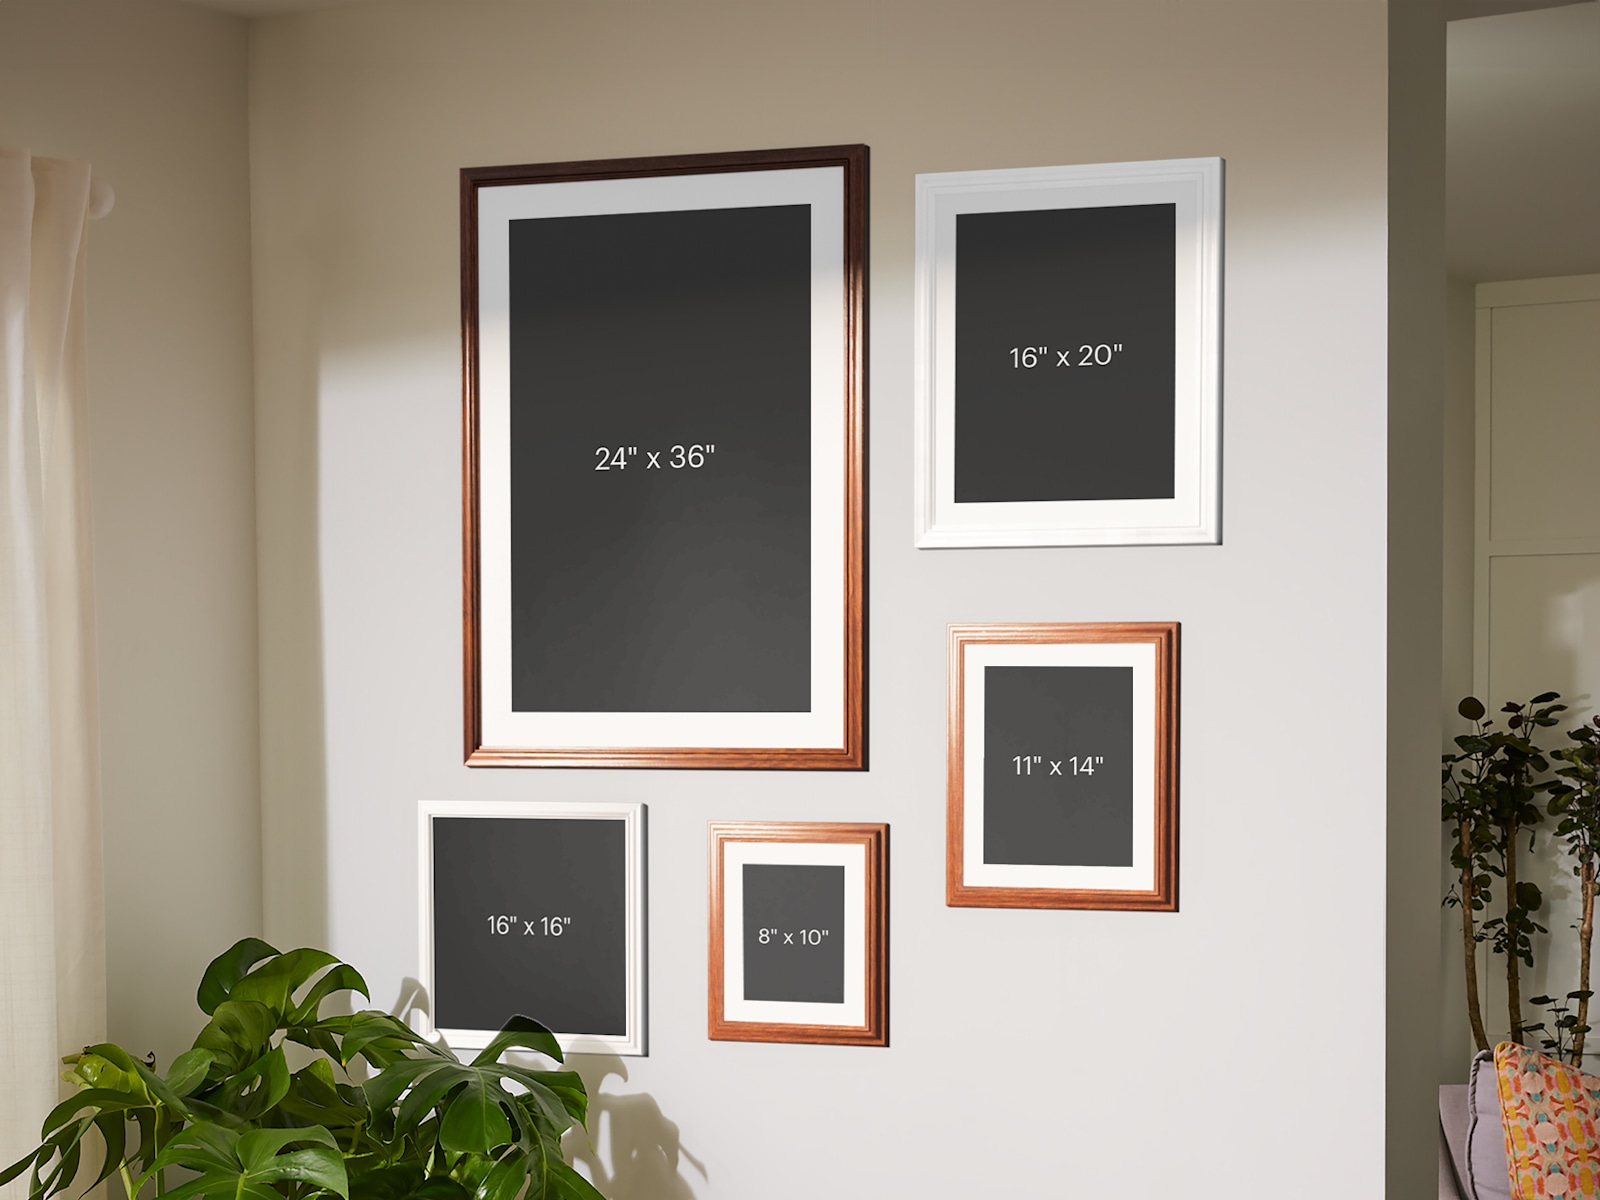 A collection of five frames shows the different sized frames available for photo prints.